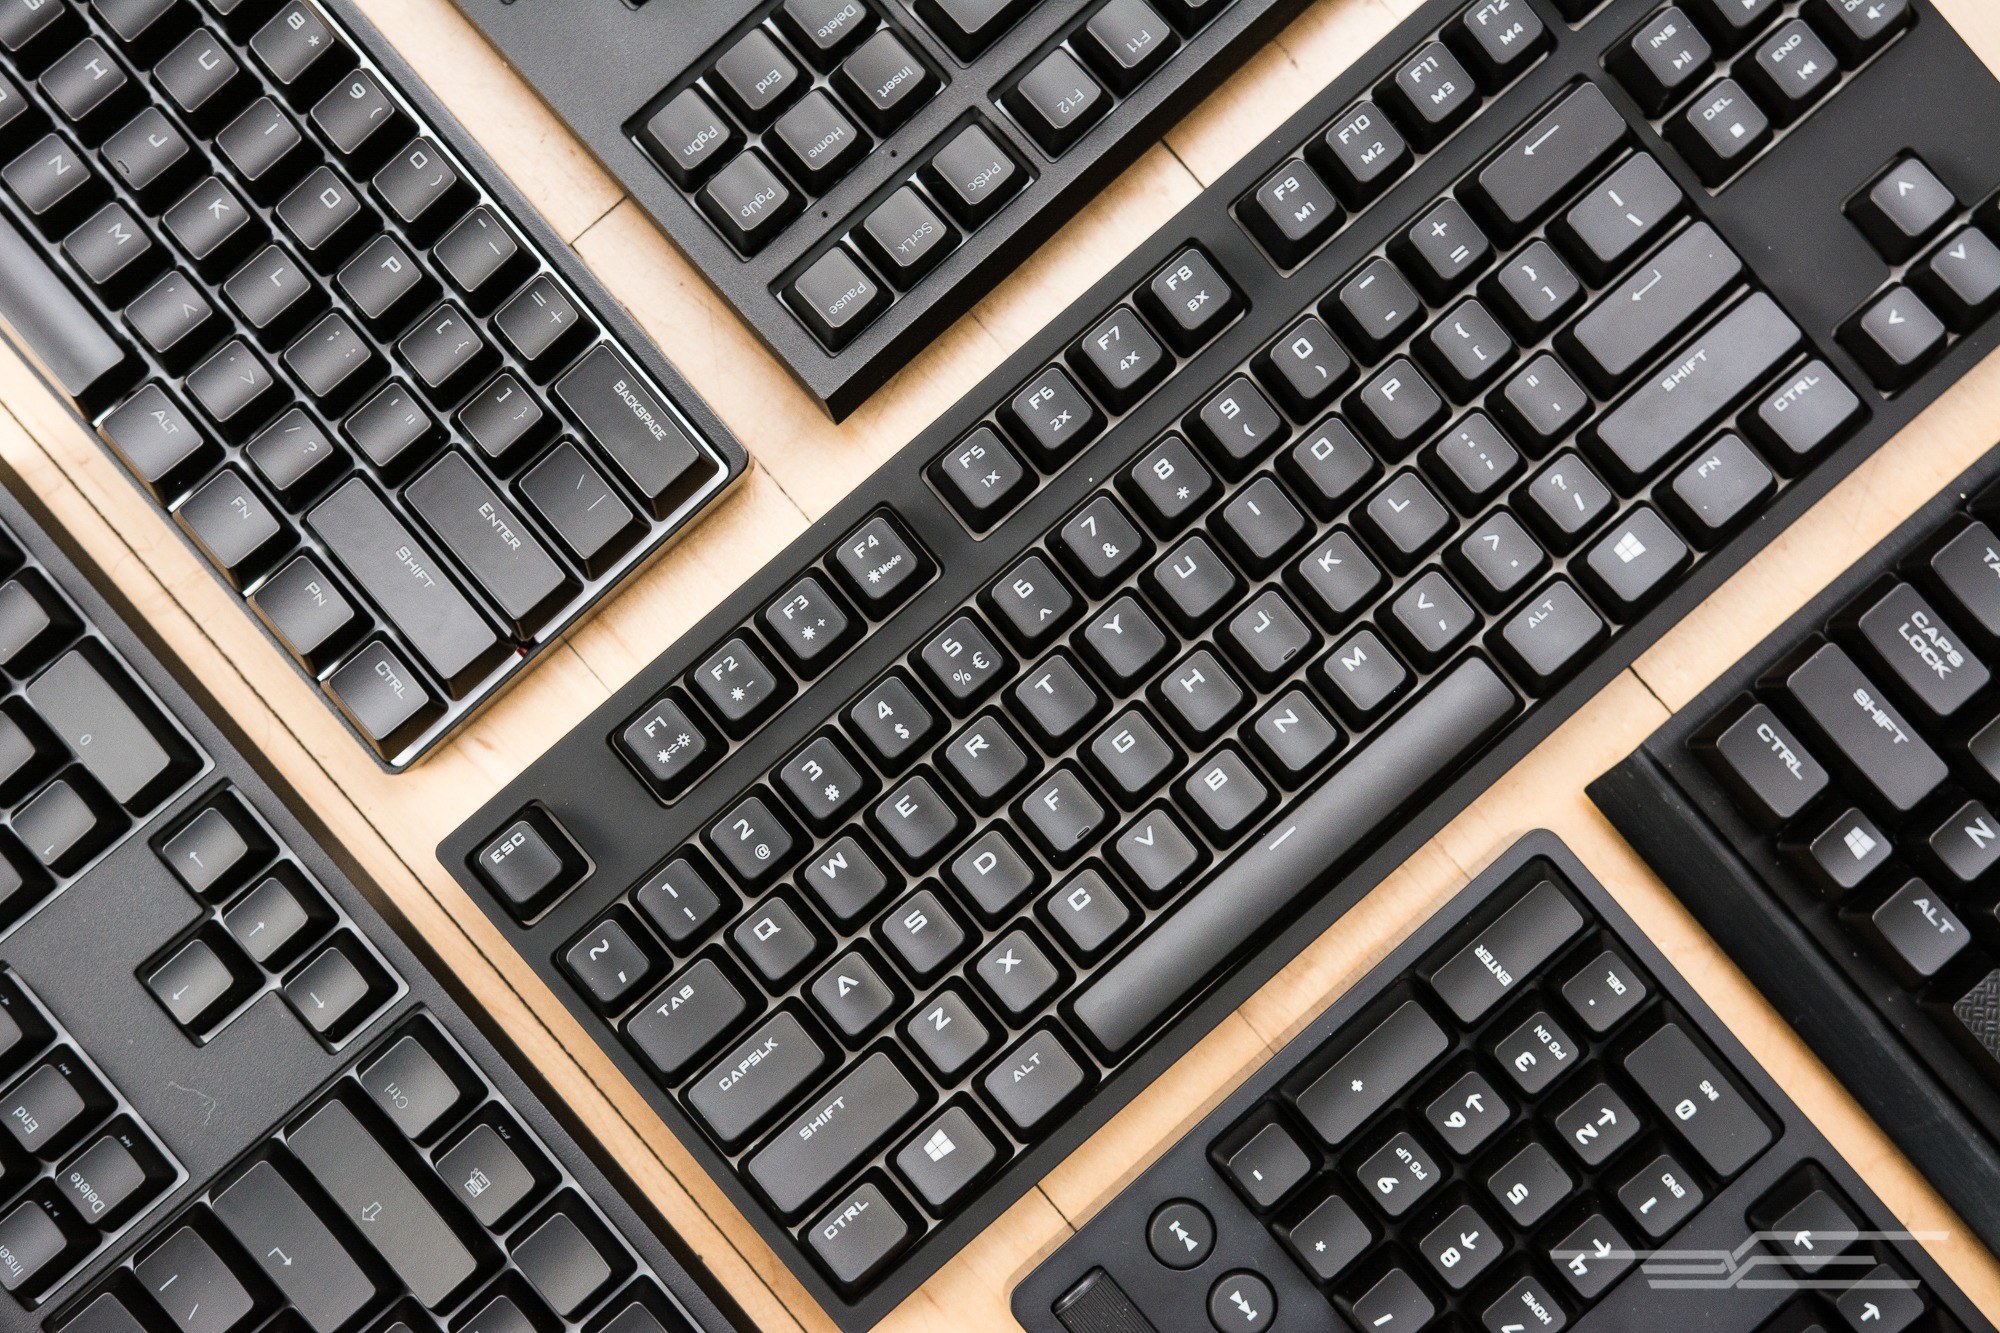 The best mechanical keyboards